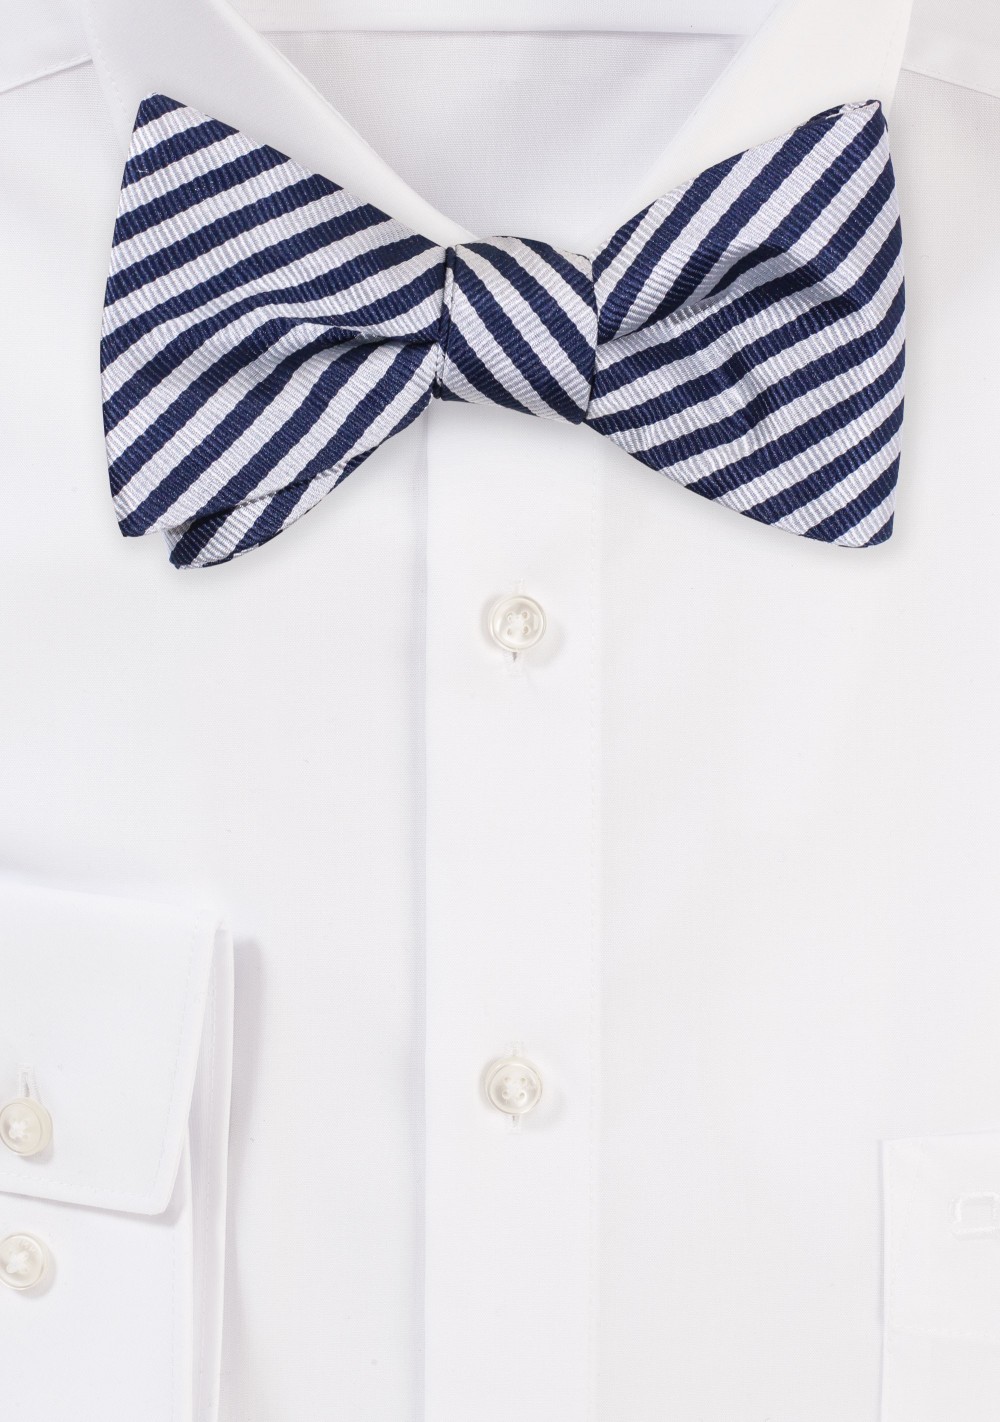 Repp Stripe Bow Tie in Silver and Navy